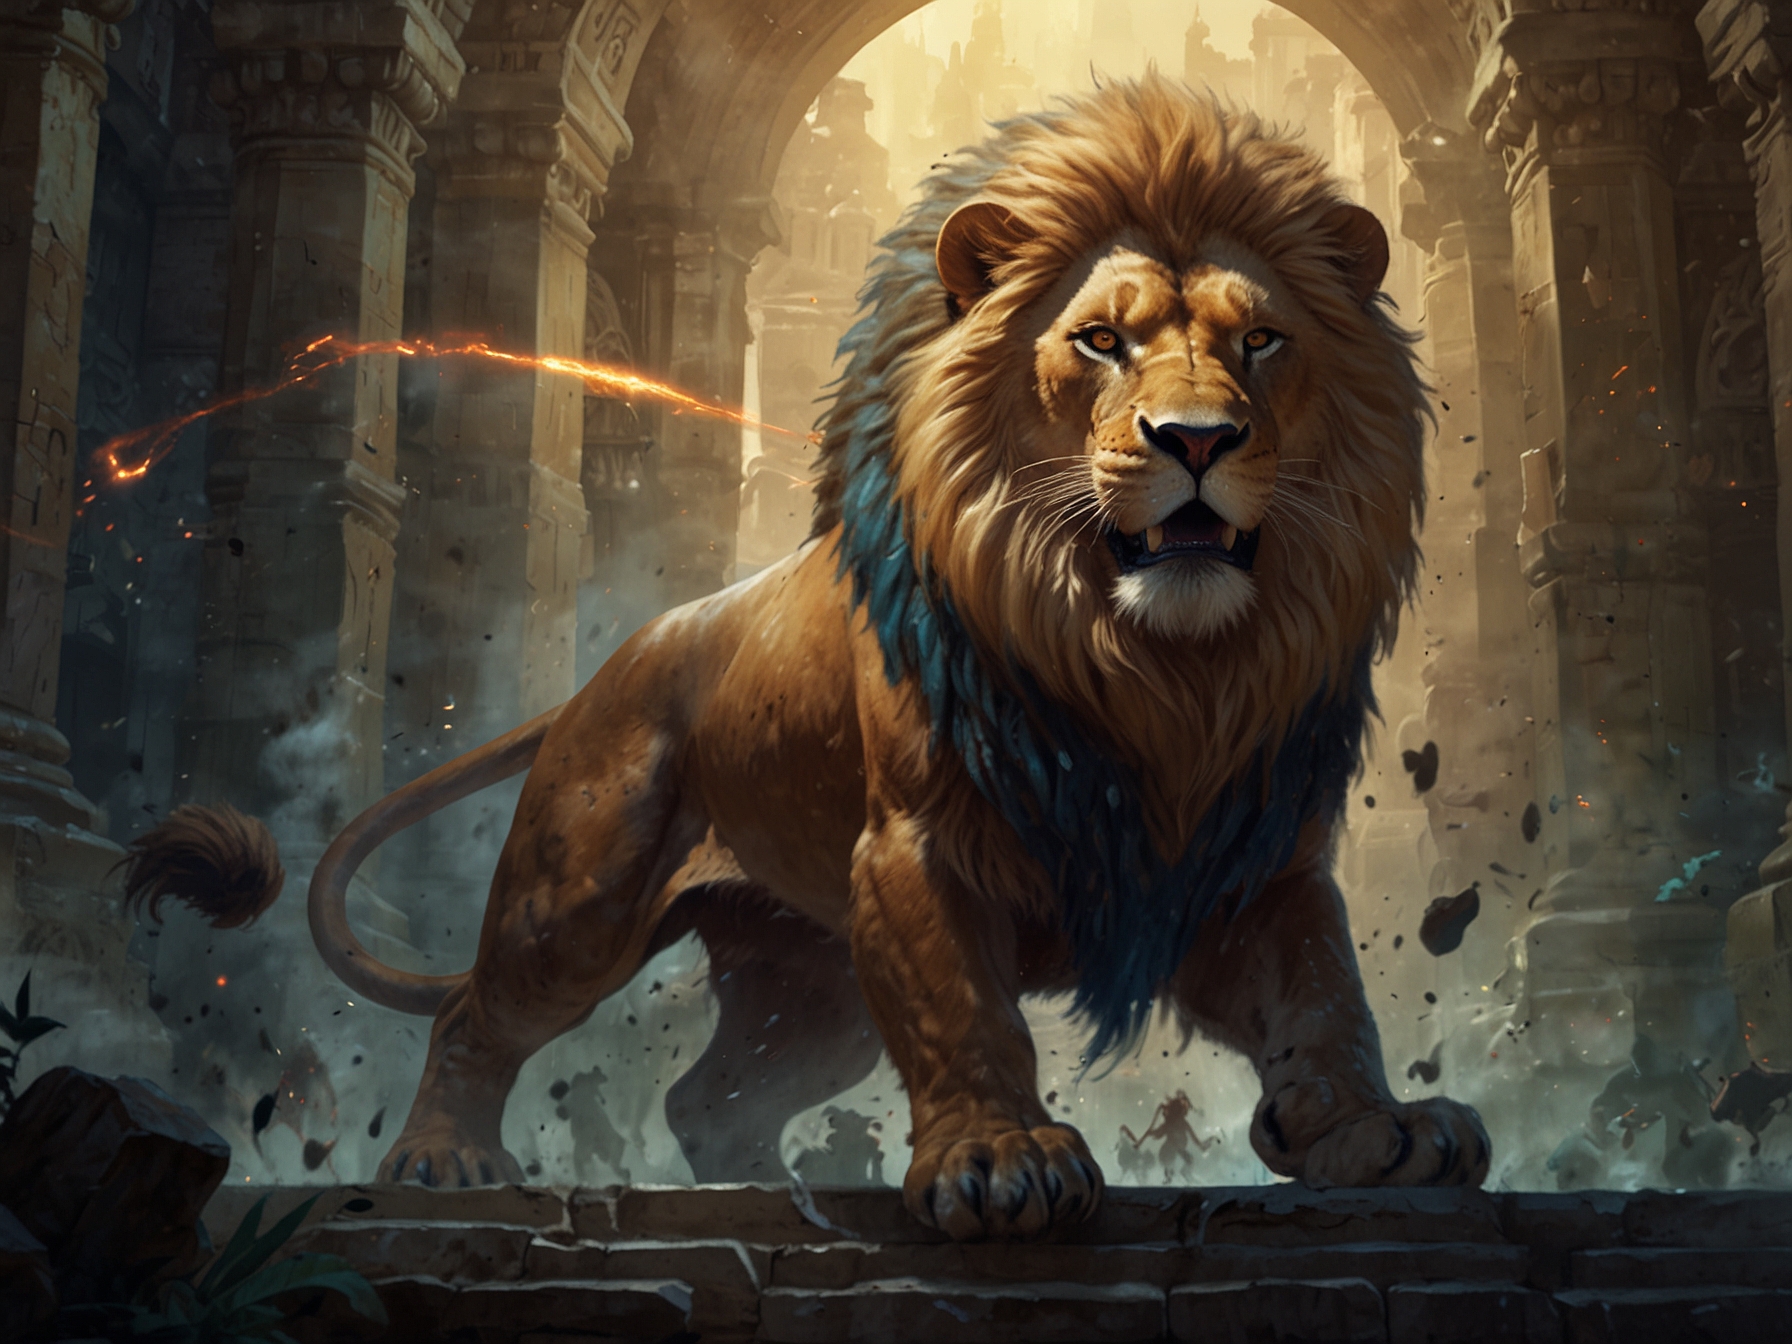 A visual of a ranged player using spells against the Divine Beast Dancing Lion, emphasizing the advantages of distance and mobility while avoiding the beast's devastating area-of-effect attacks.